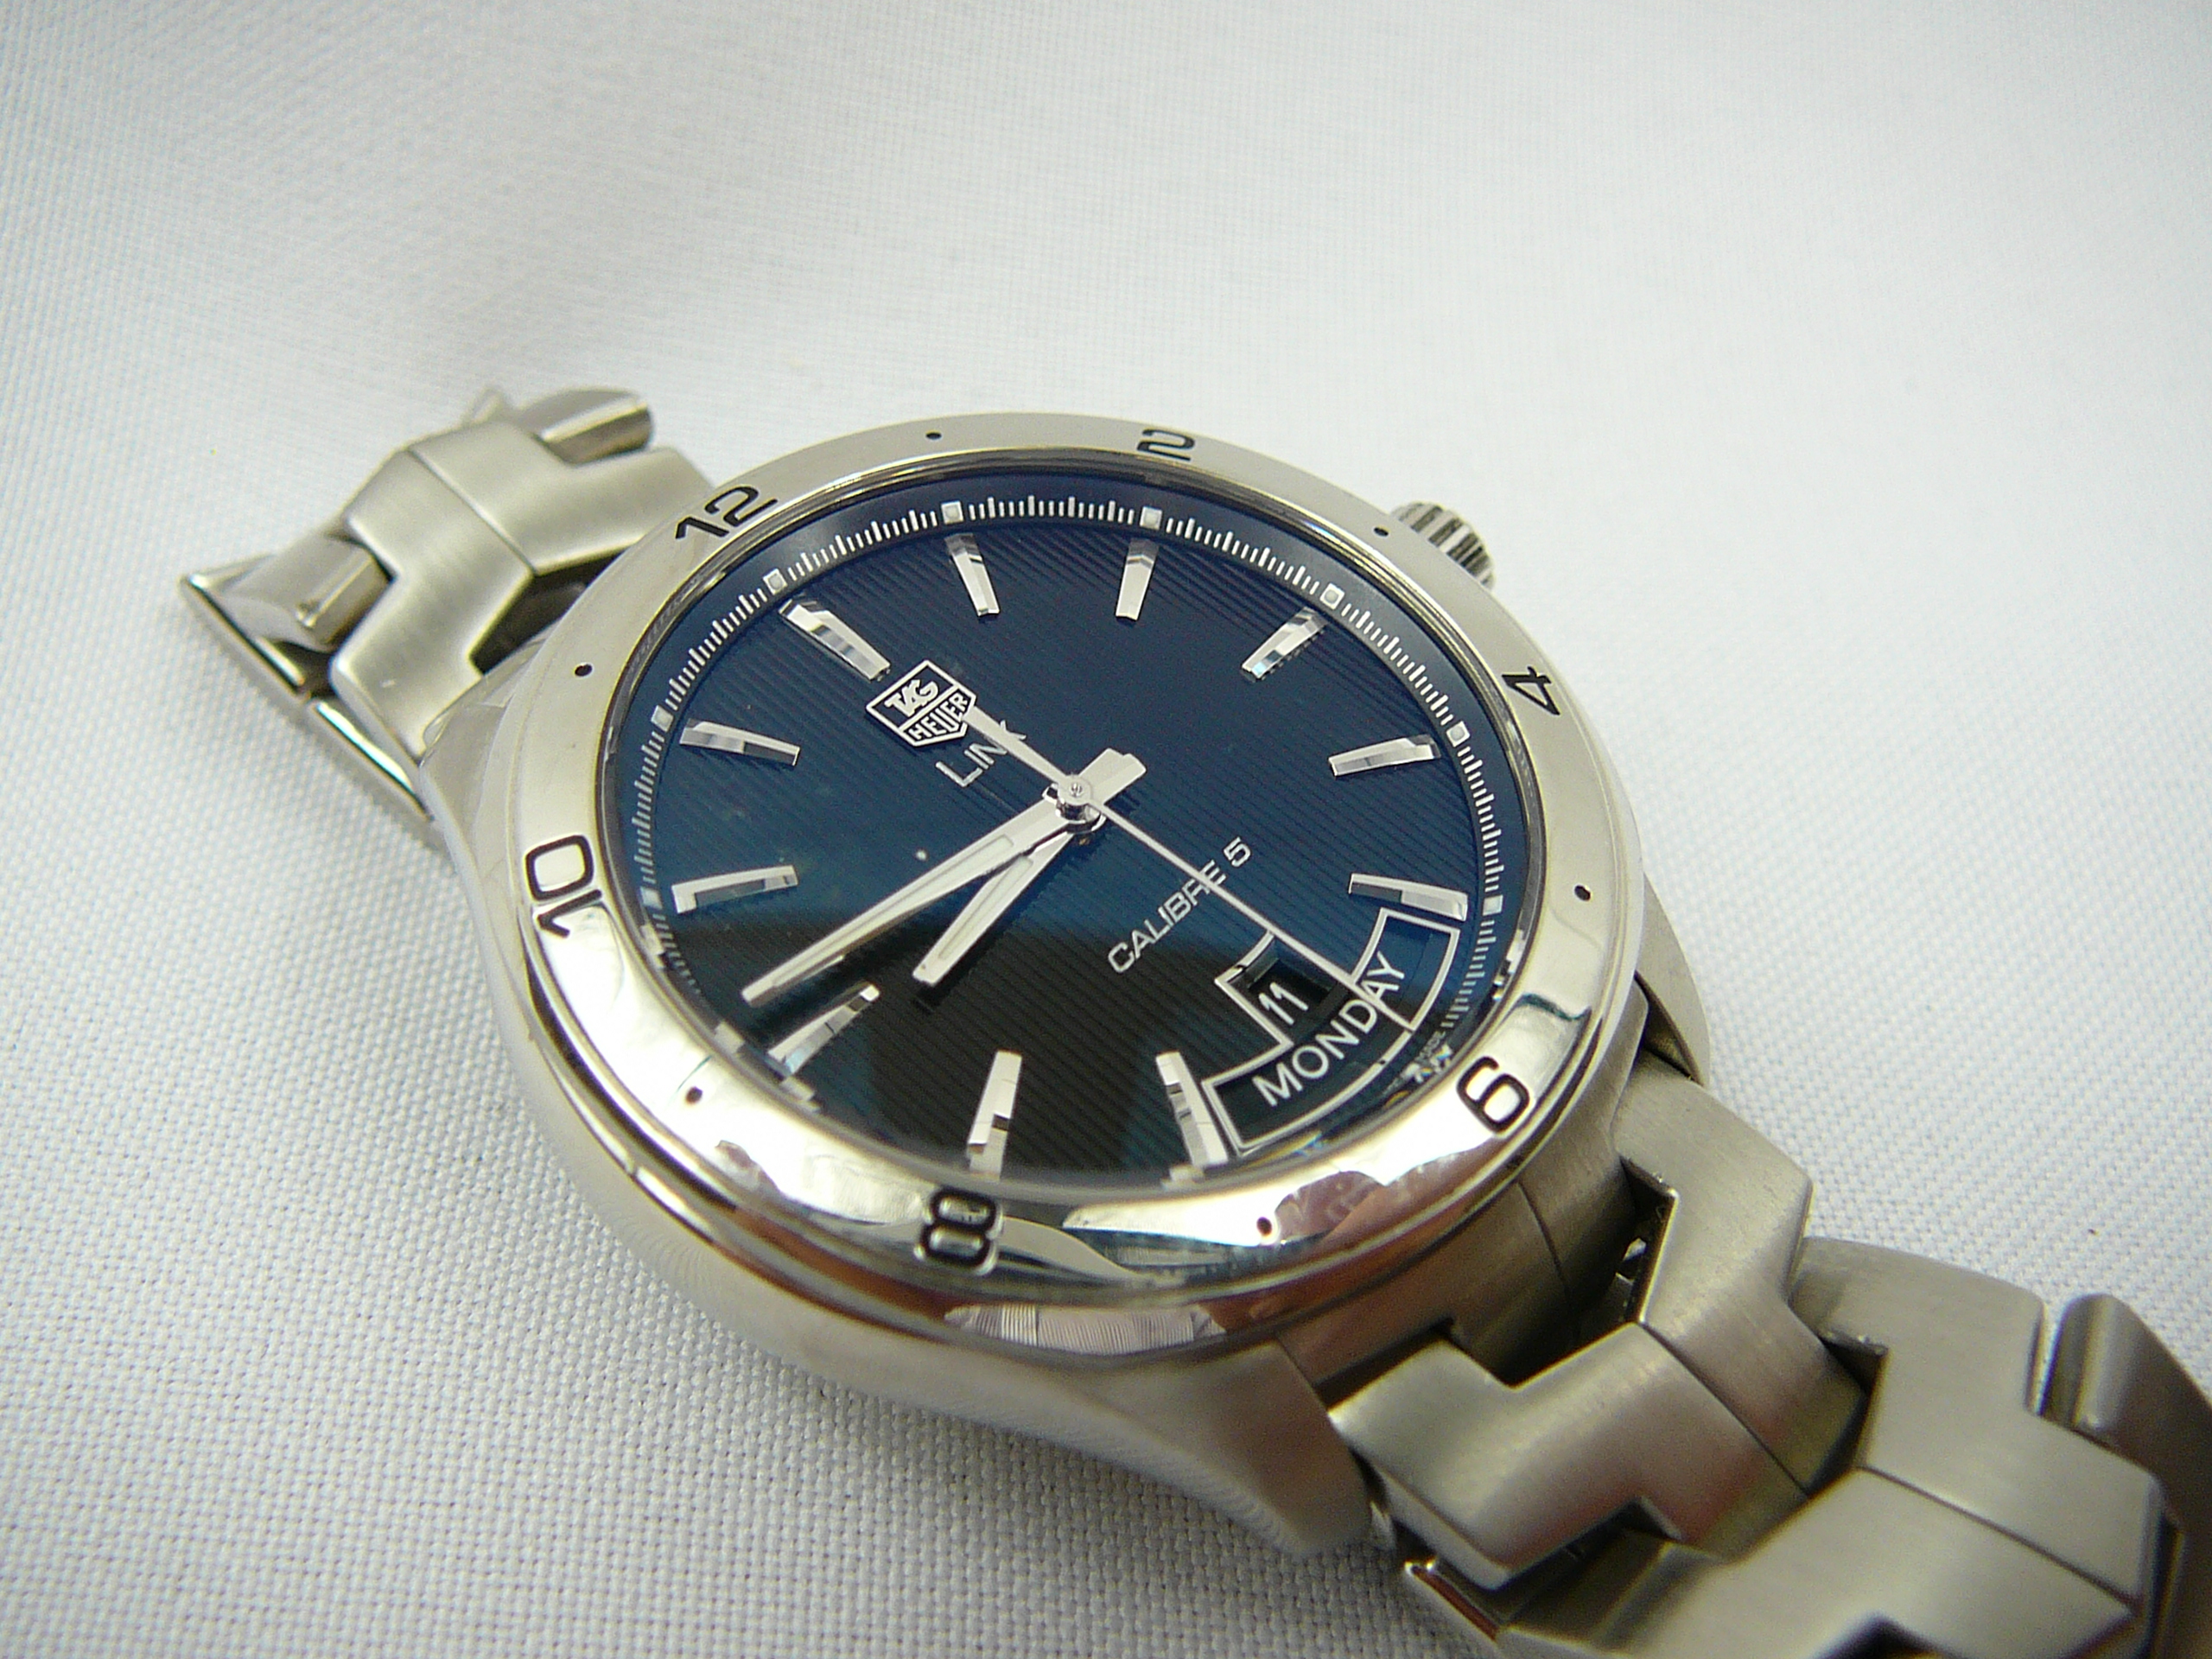 Gents Tag Heuer wrist watch - Image 2 of 3